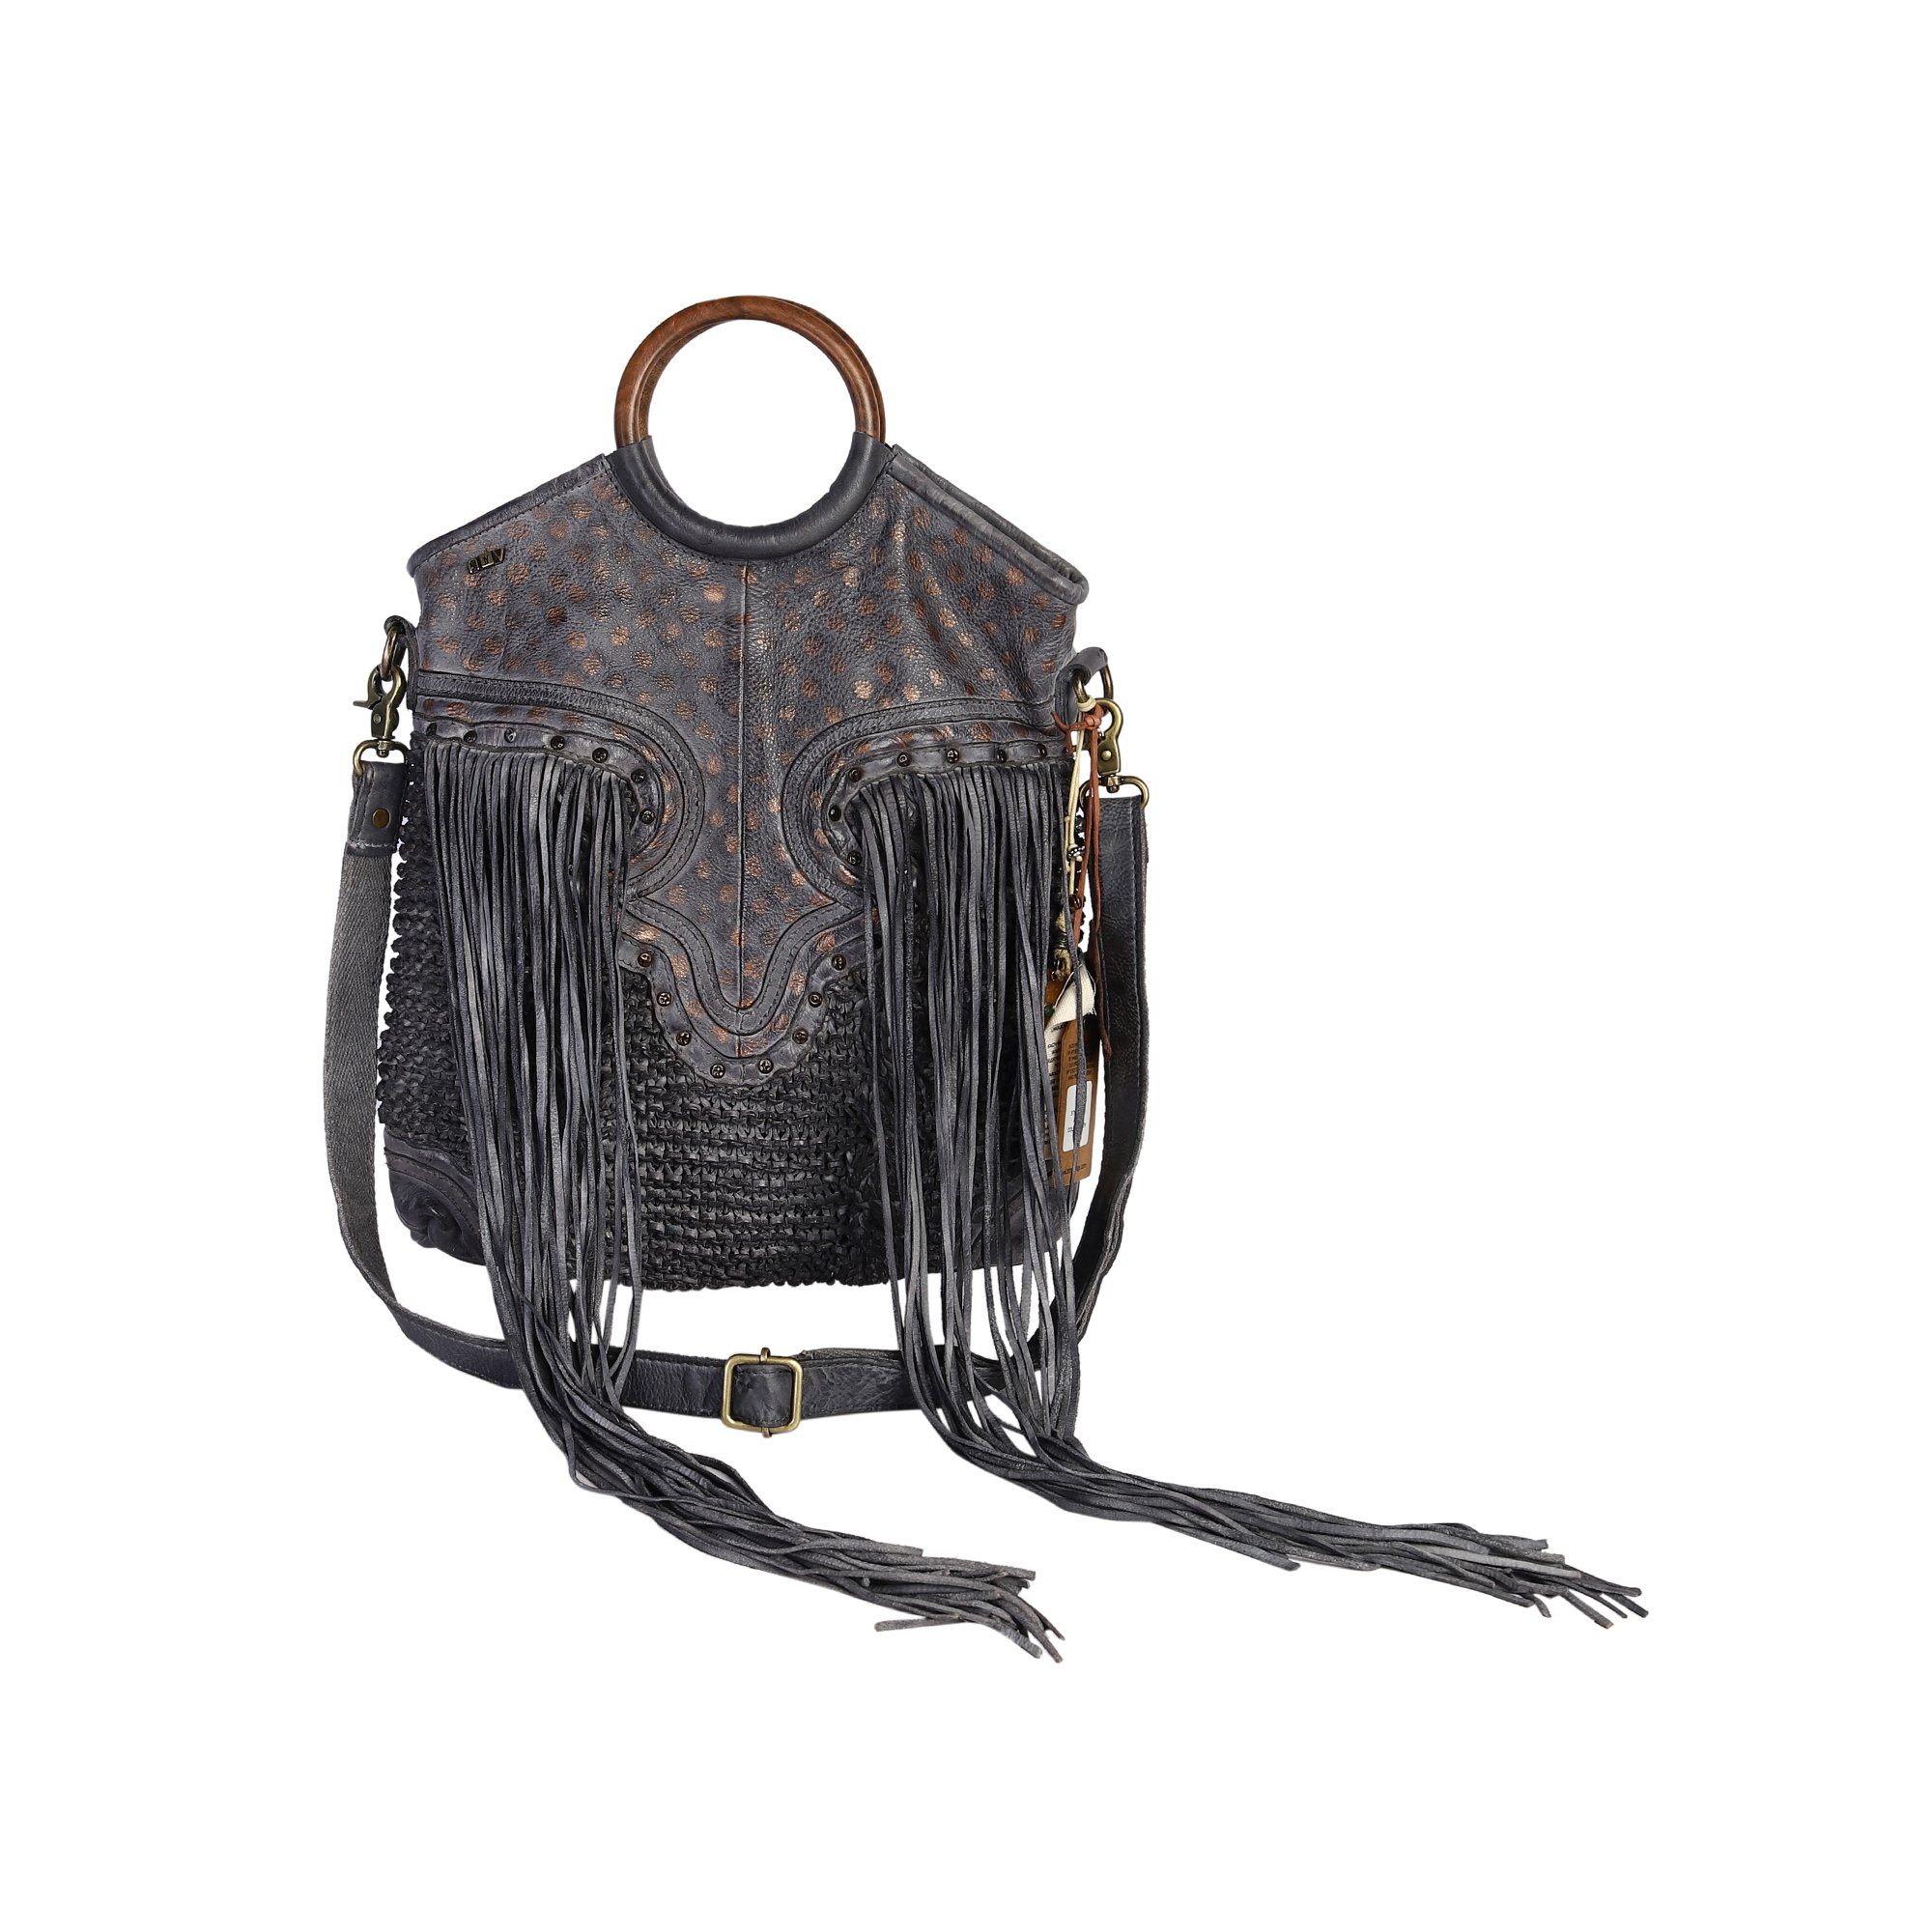 Martinka Designer Bag: Grey leather shopper with wooden handle with weaving, fringes and metallic print by Art N Vintage